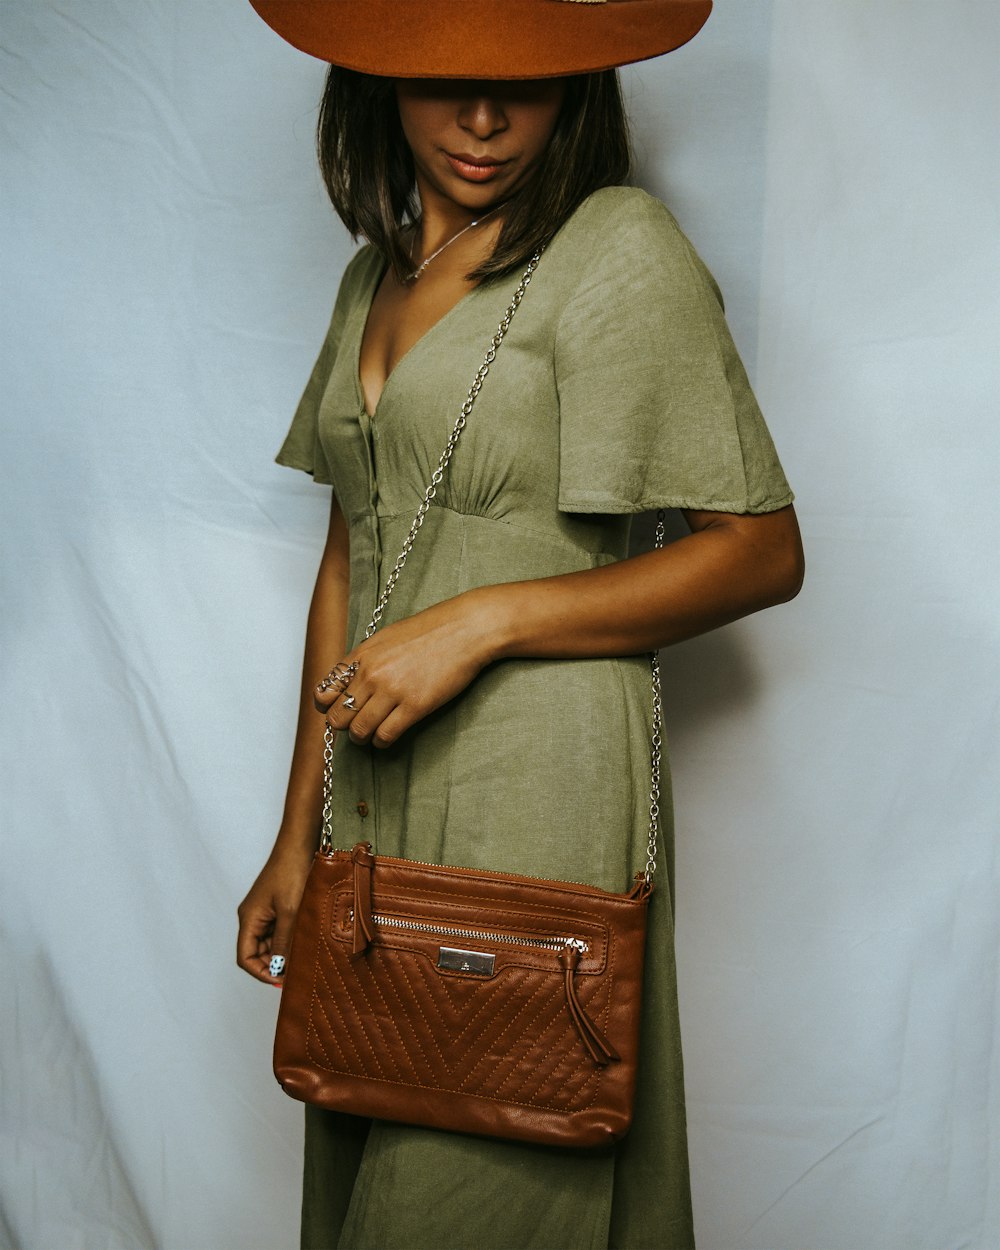 a woman wearing a brown hat and holding a brown purse